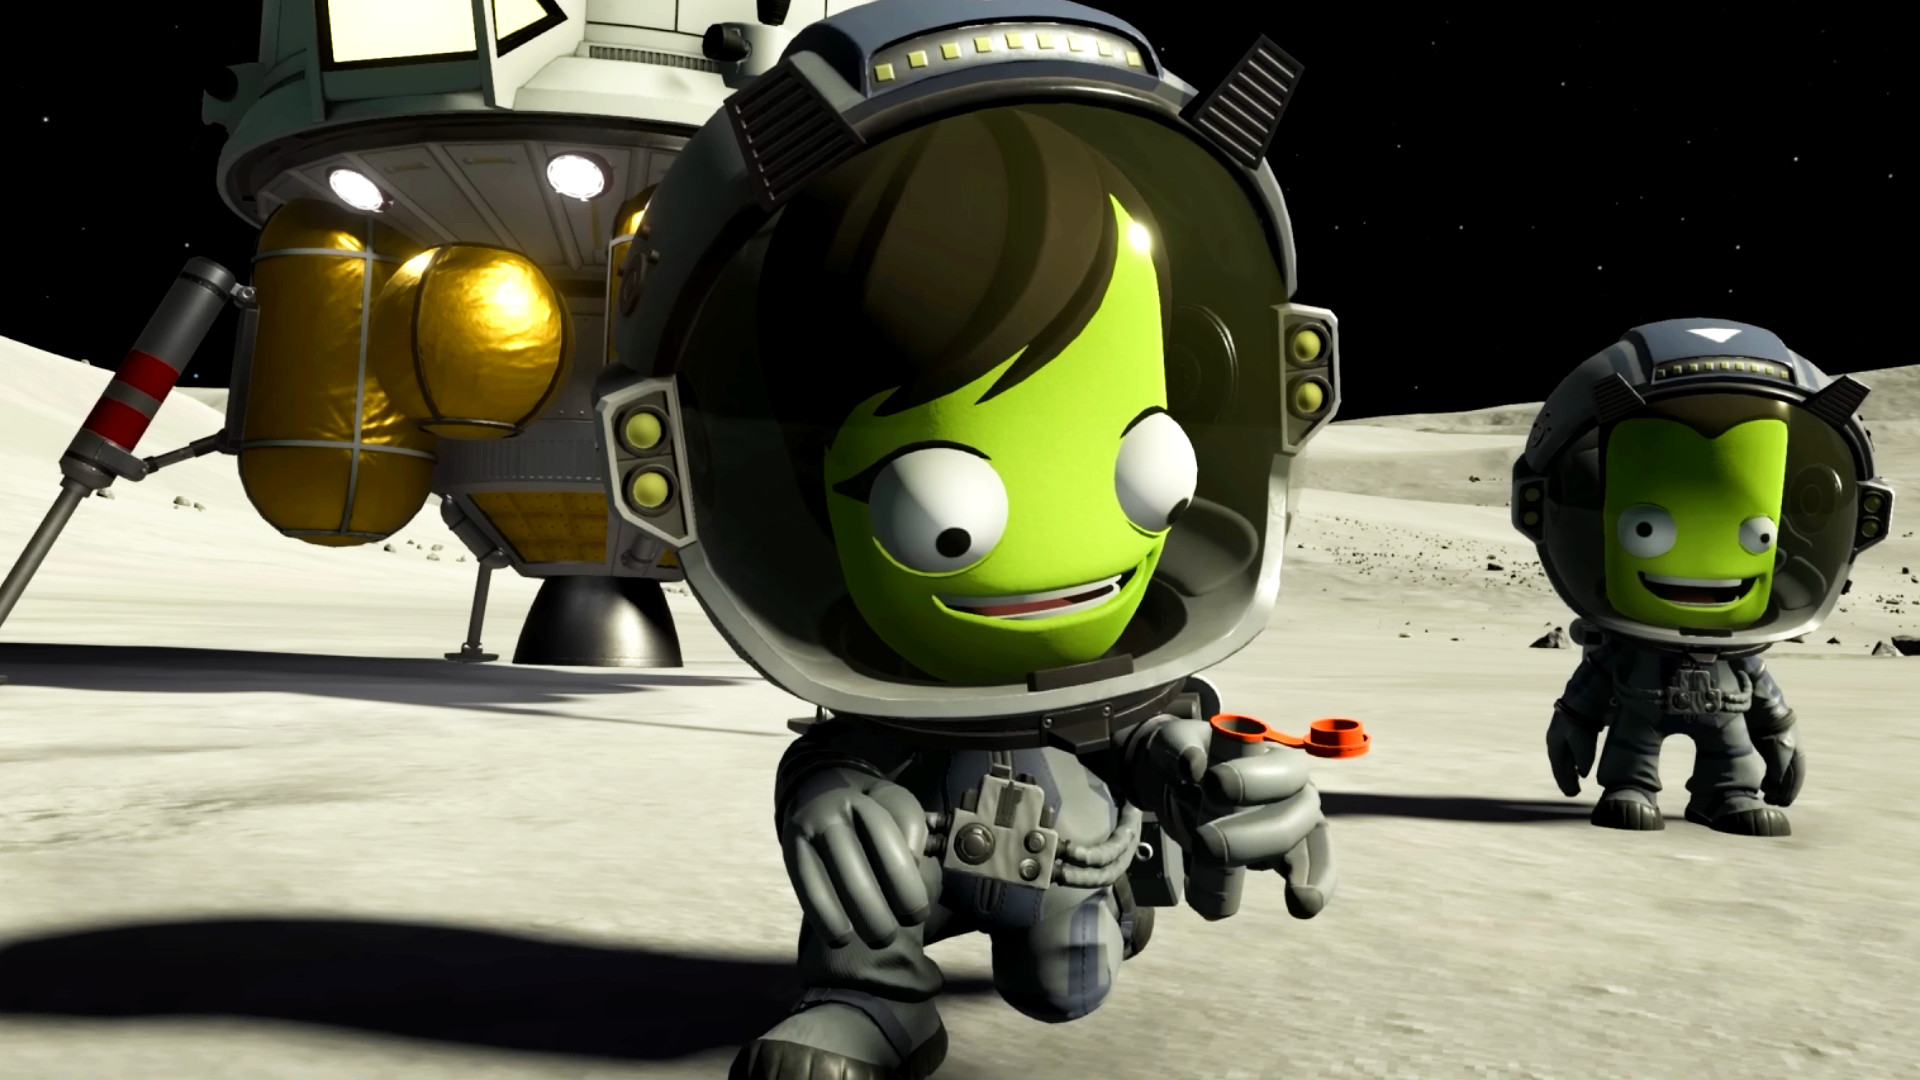 The Kerbal Space Program 2 For Science update adds a new exploration mode